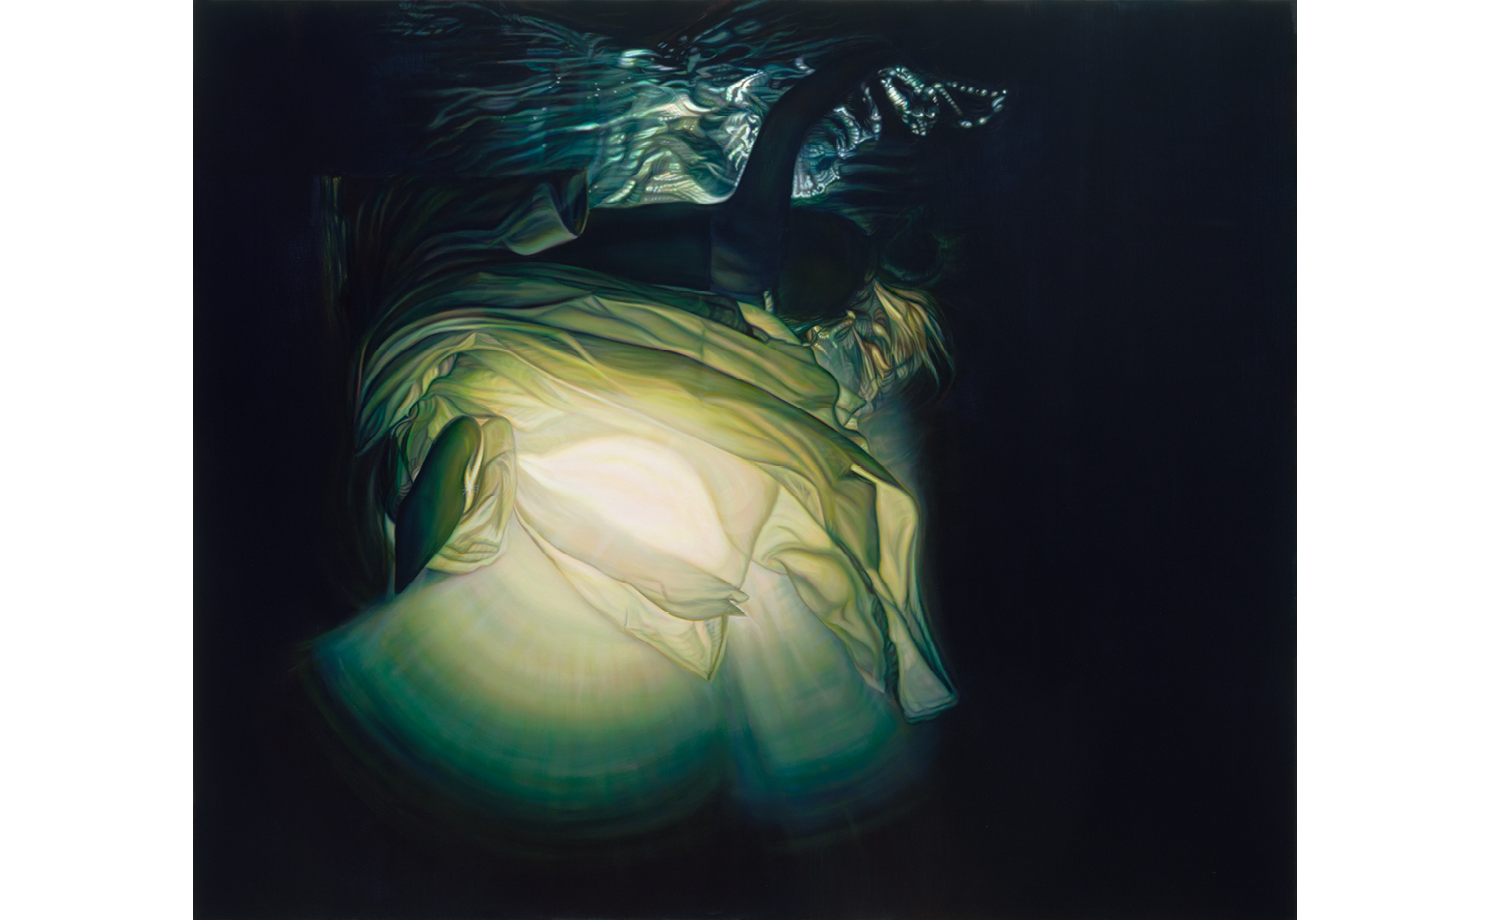 Painting of a person after floating into a body of water. The foreground of the image shows a white fabric floating with a figureswimming toward the surface of the water. There is a spotlight in the white fabric.